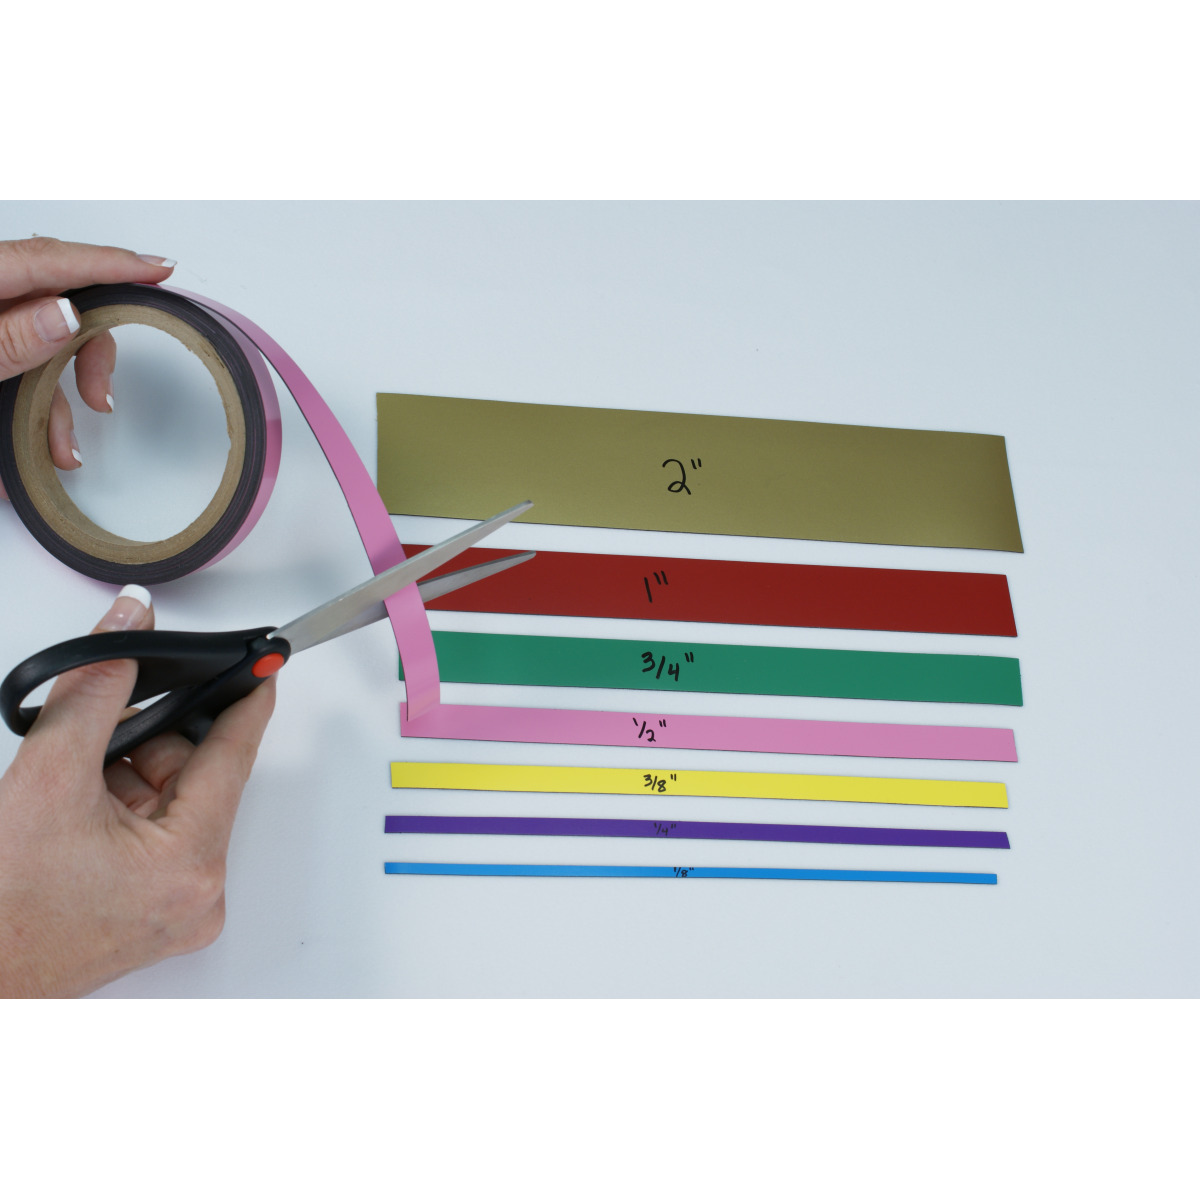 50 Self Adhesive Flexible Magnetic Sheets 8 x 10 inches